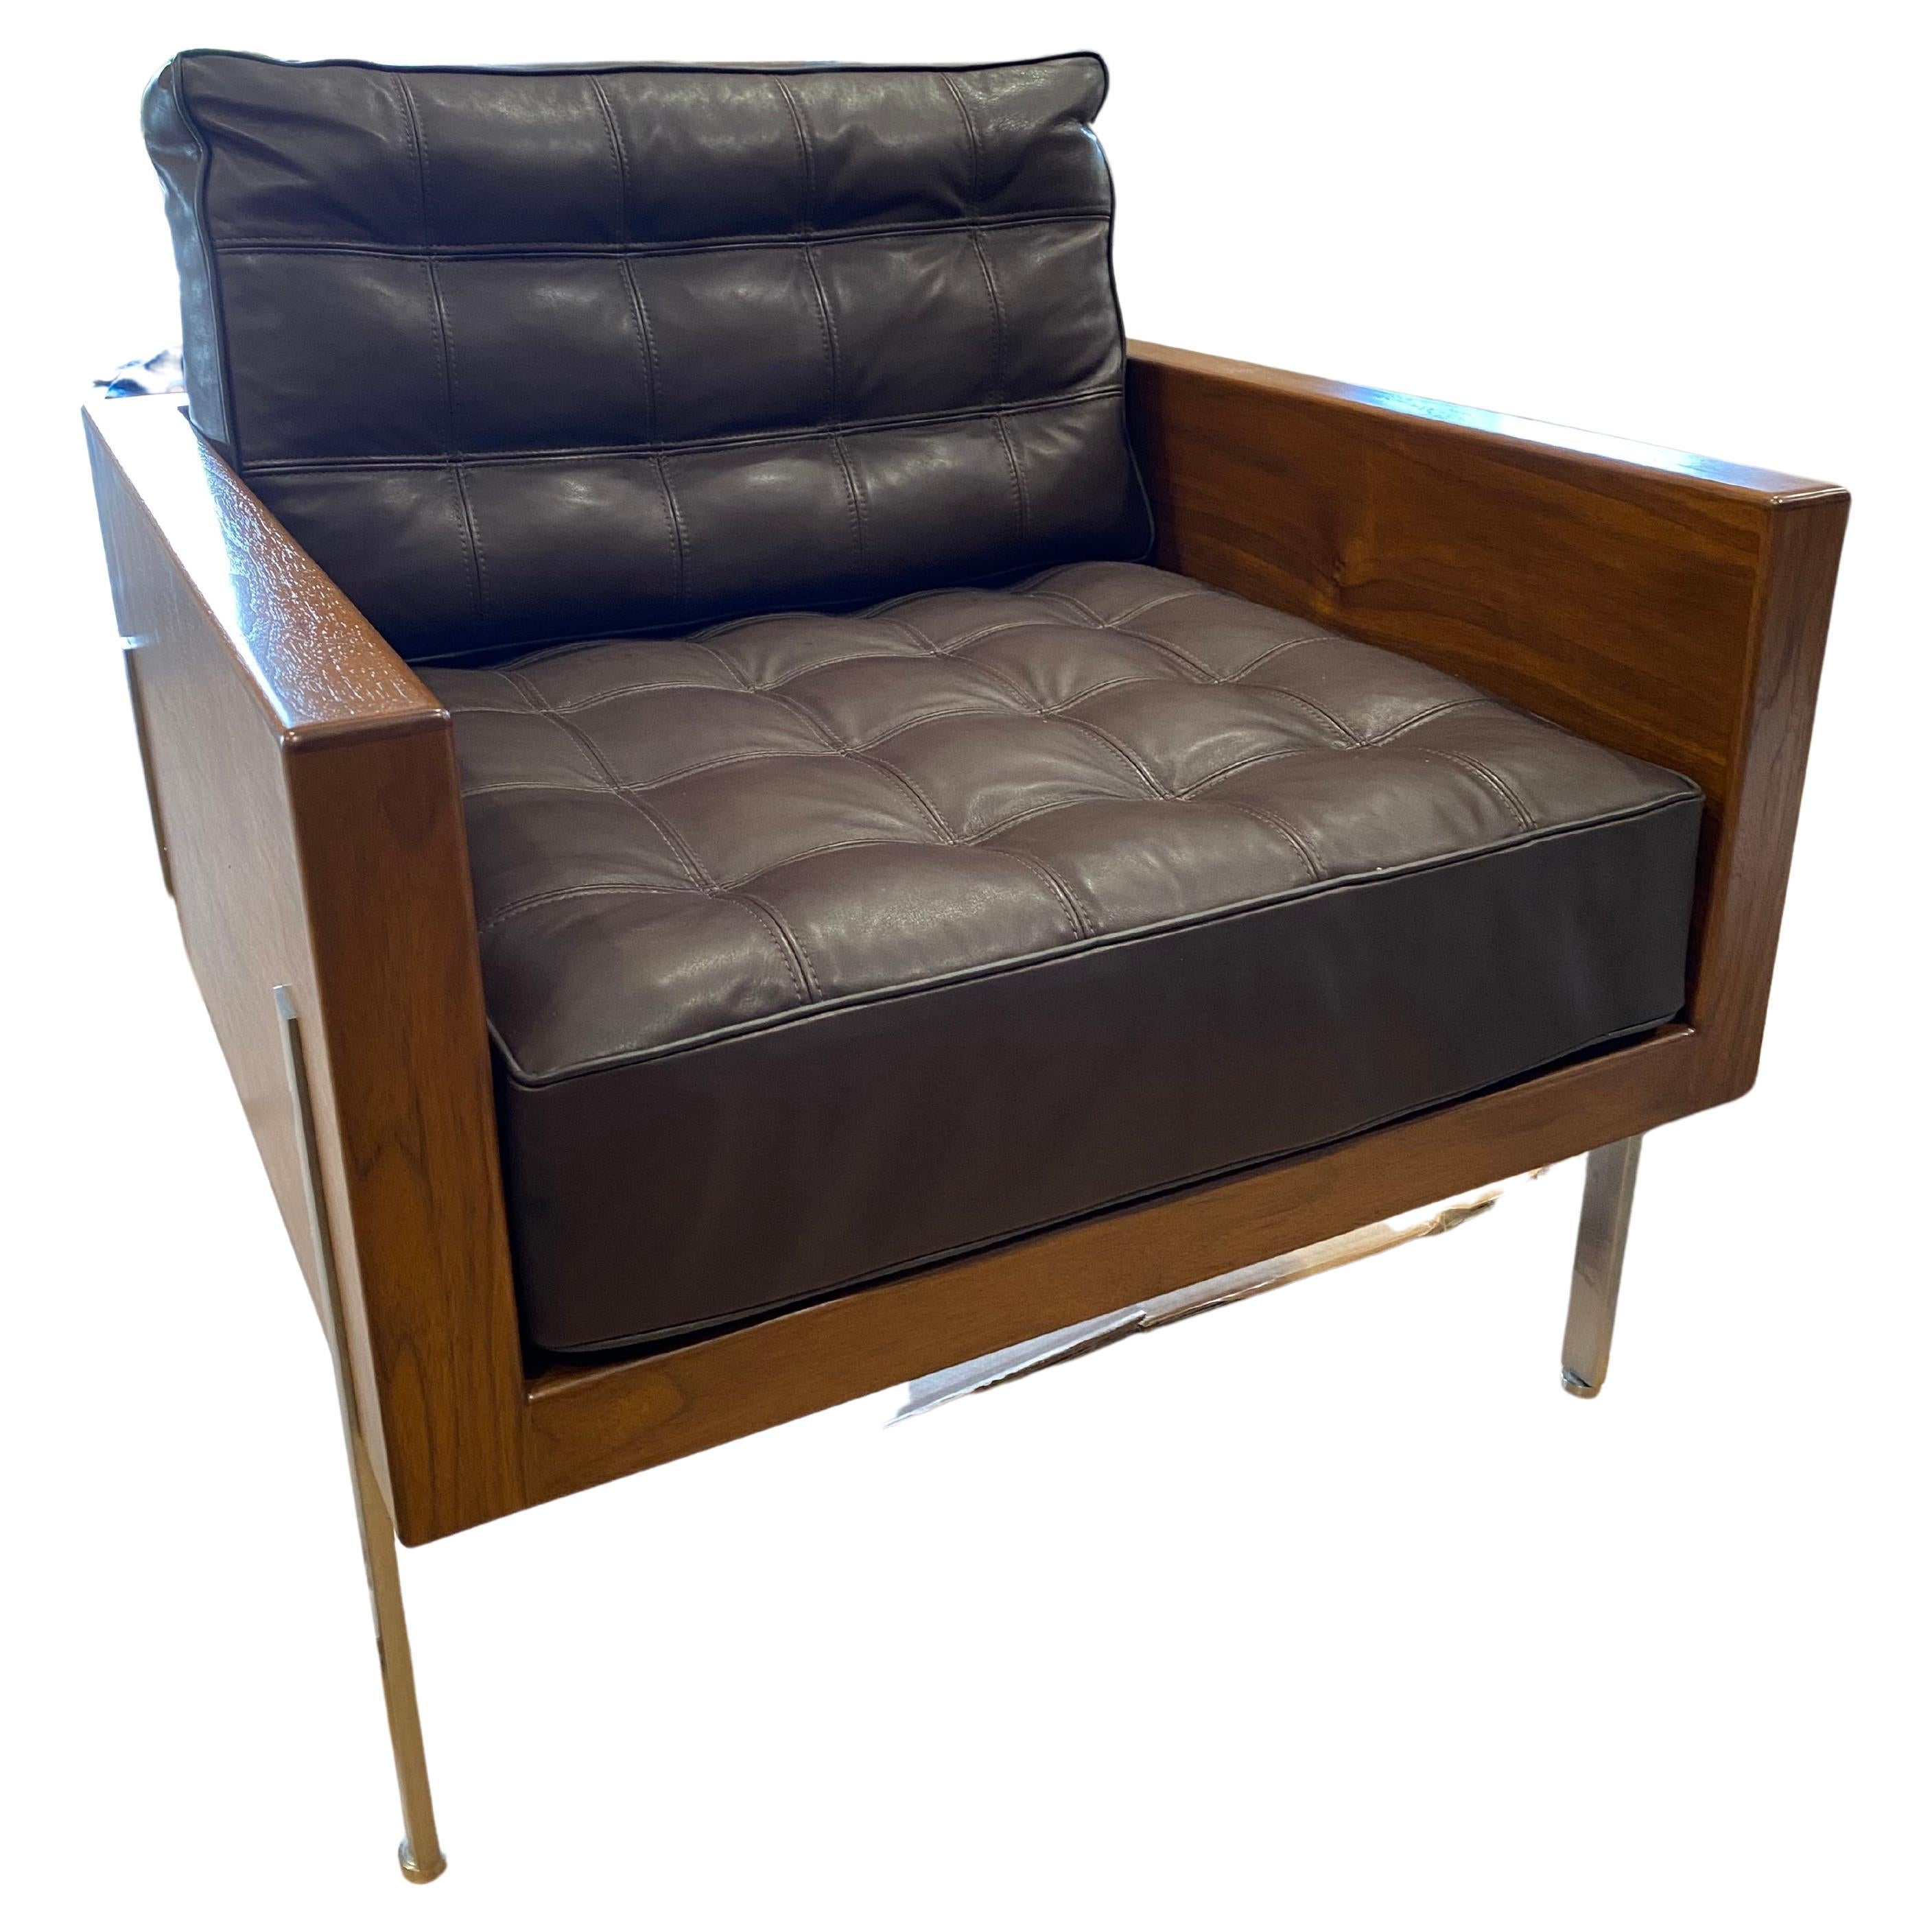 Architectural Series lounge chair in leather by Harvey Probber in STOCK